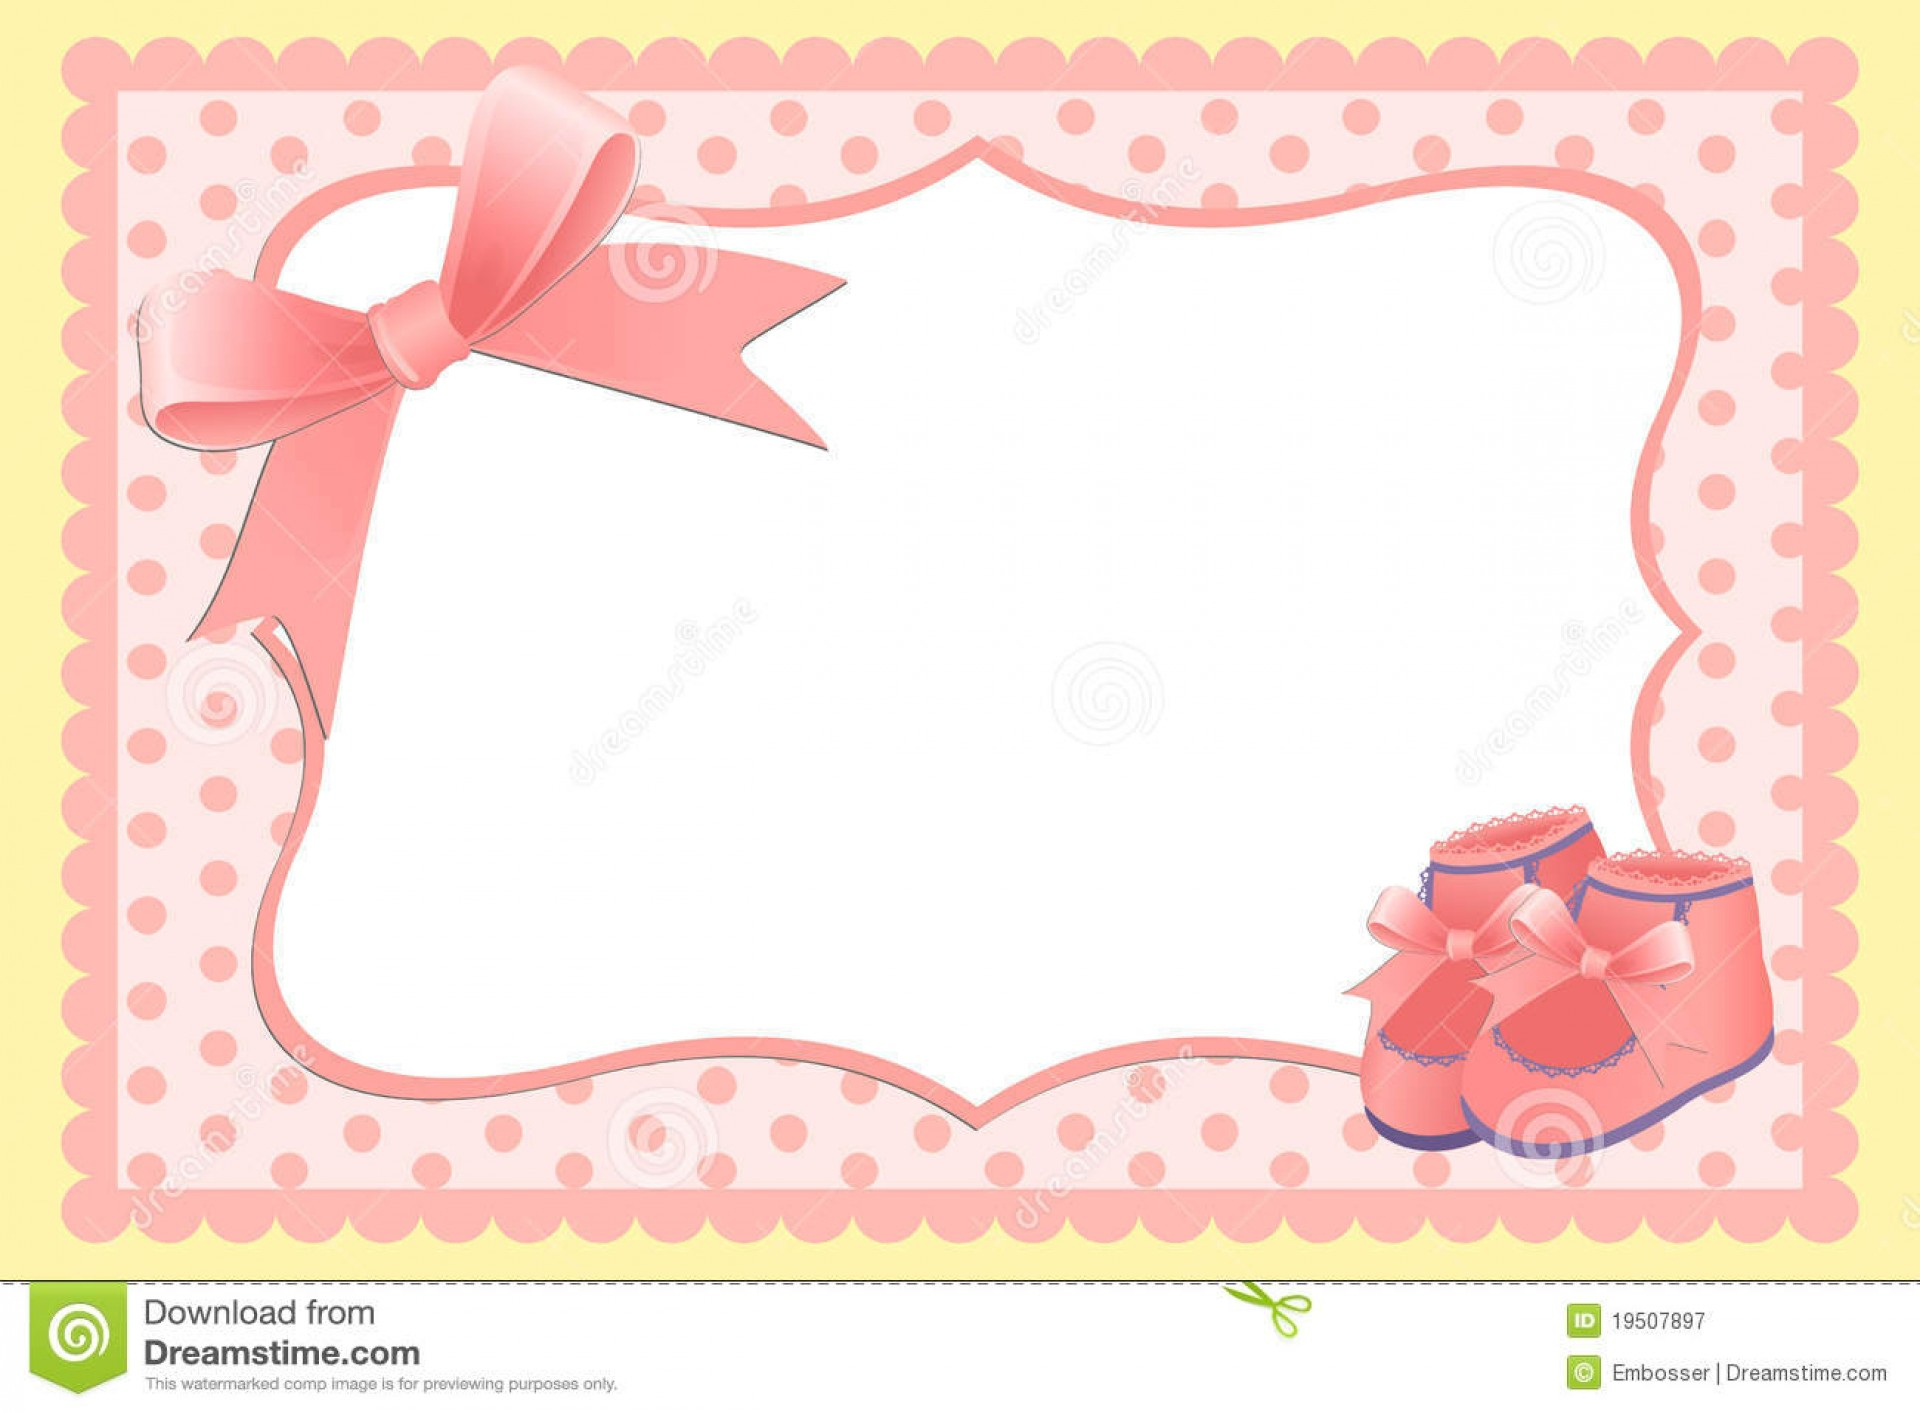 015 Free Birth Announcements Templates Template Ideas Elephant - Free Birth Announcements Printable